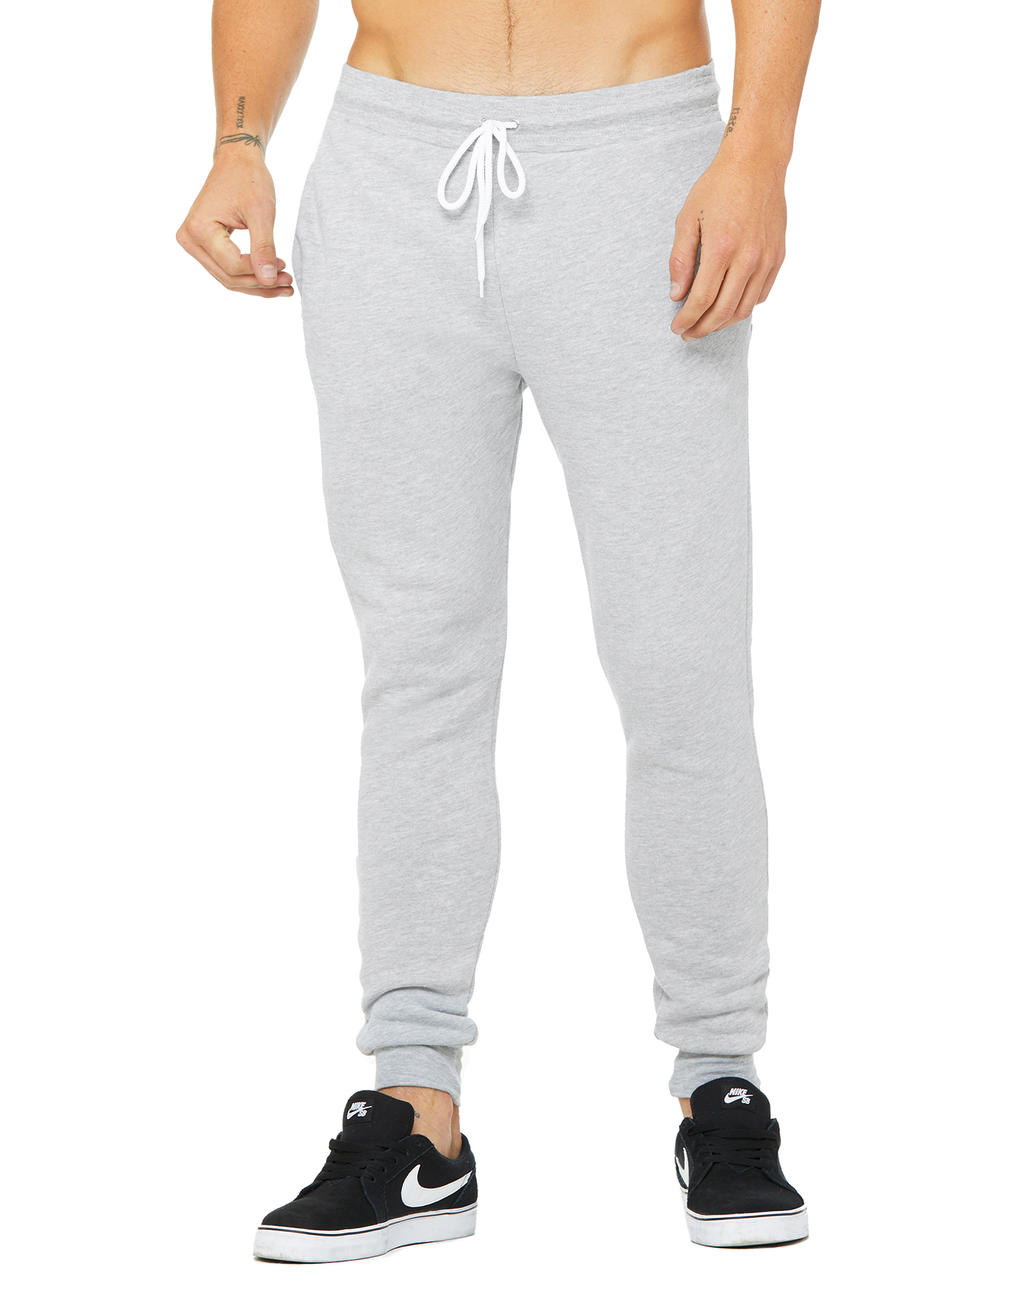  Unisex Jogger Sweatpants in Farbe Athletic Heather